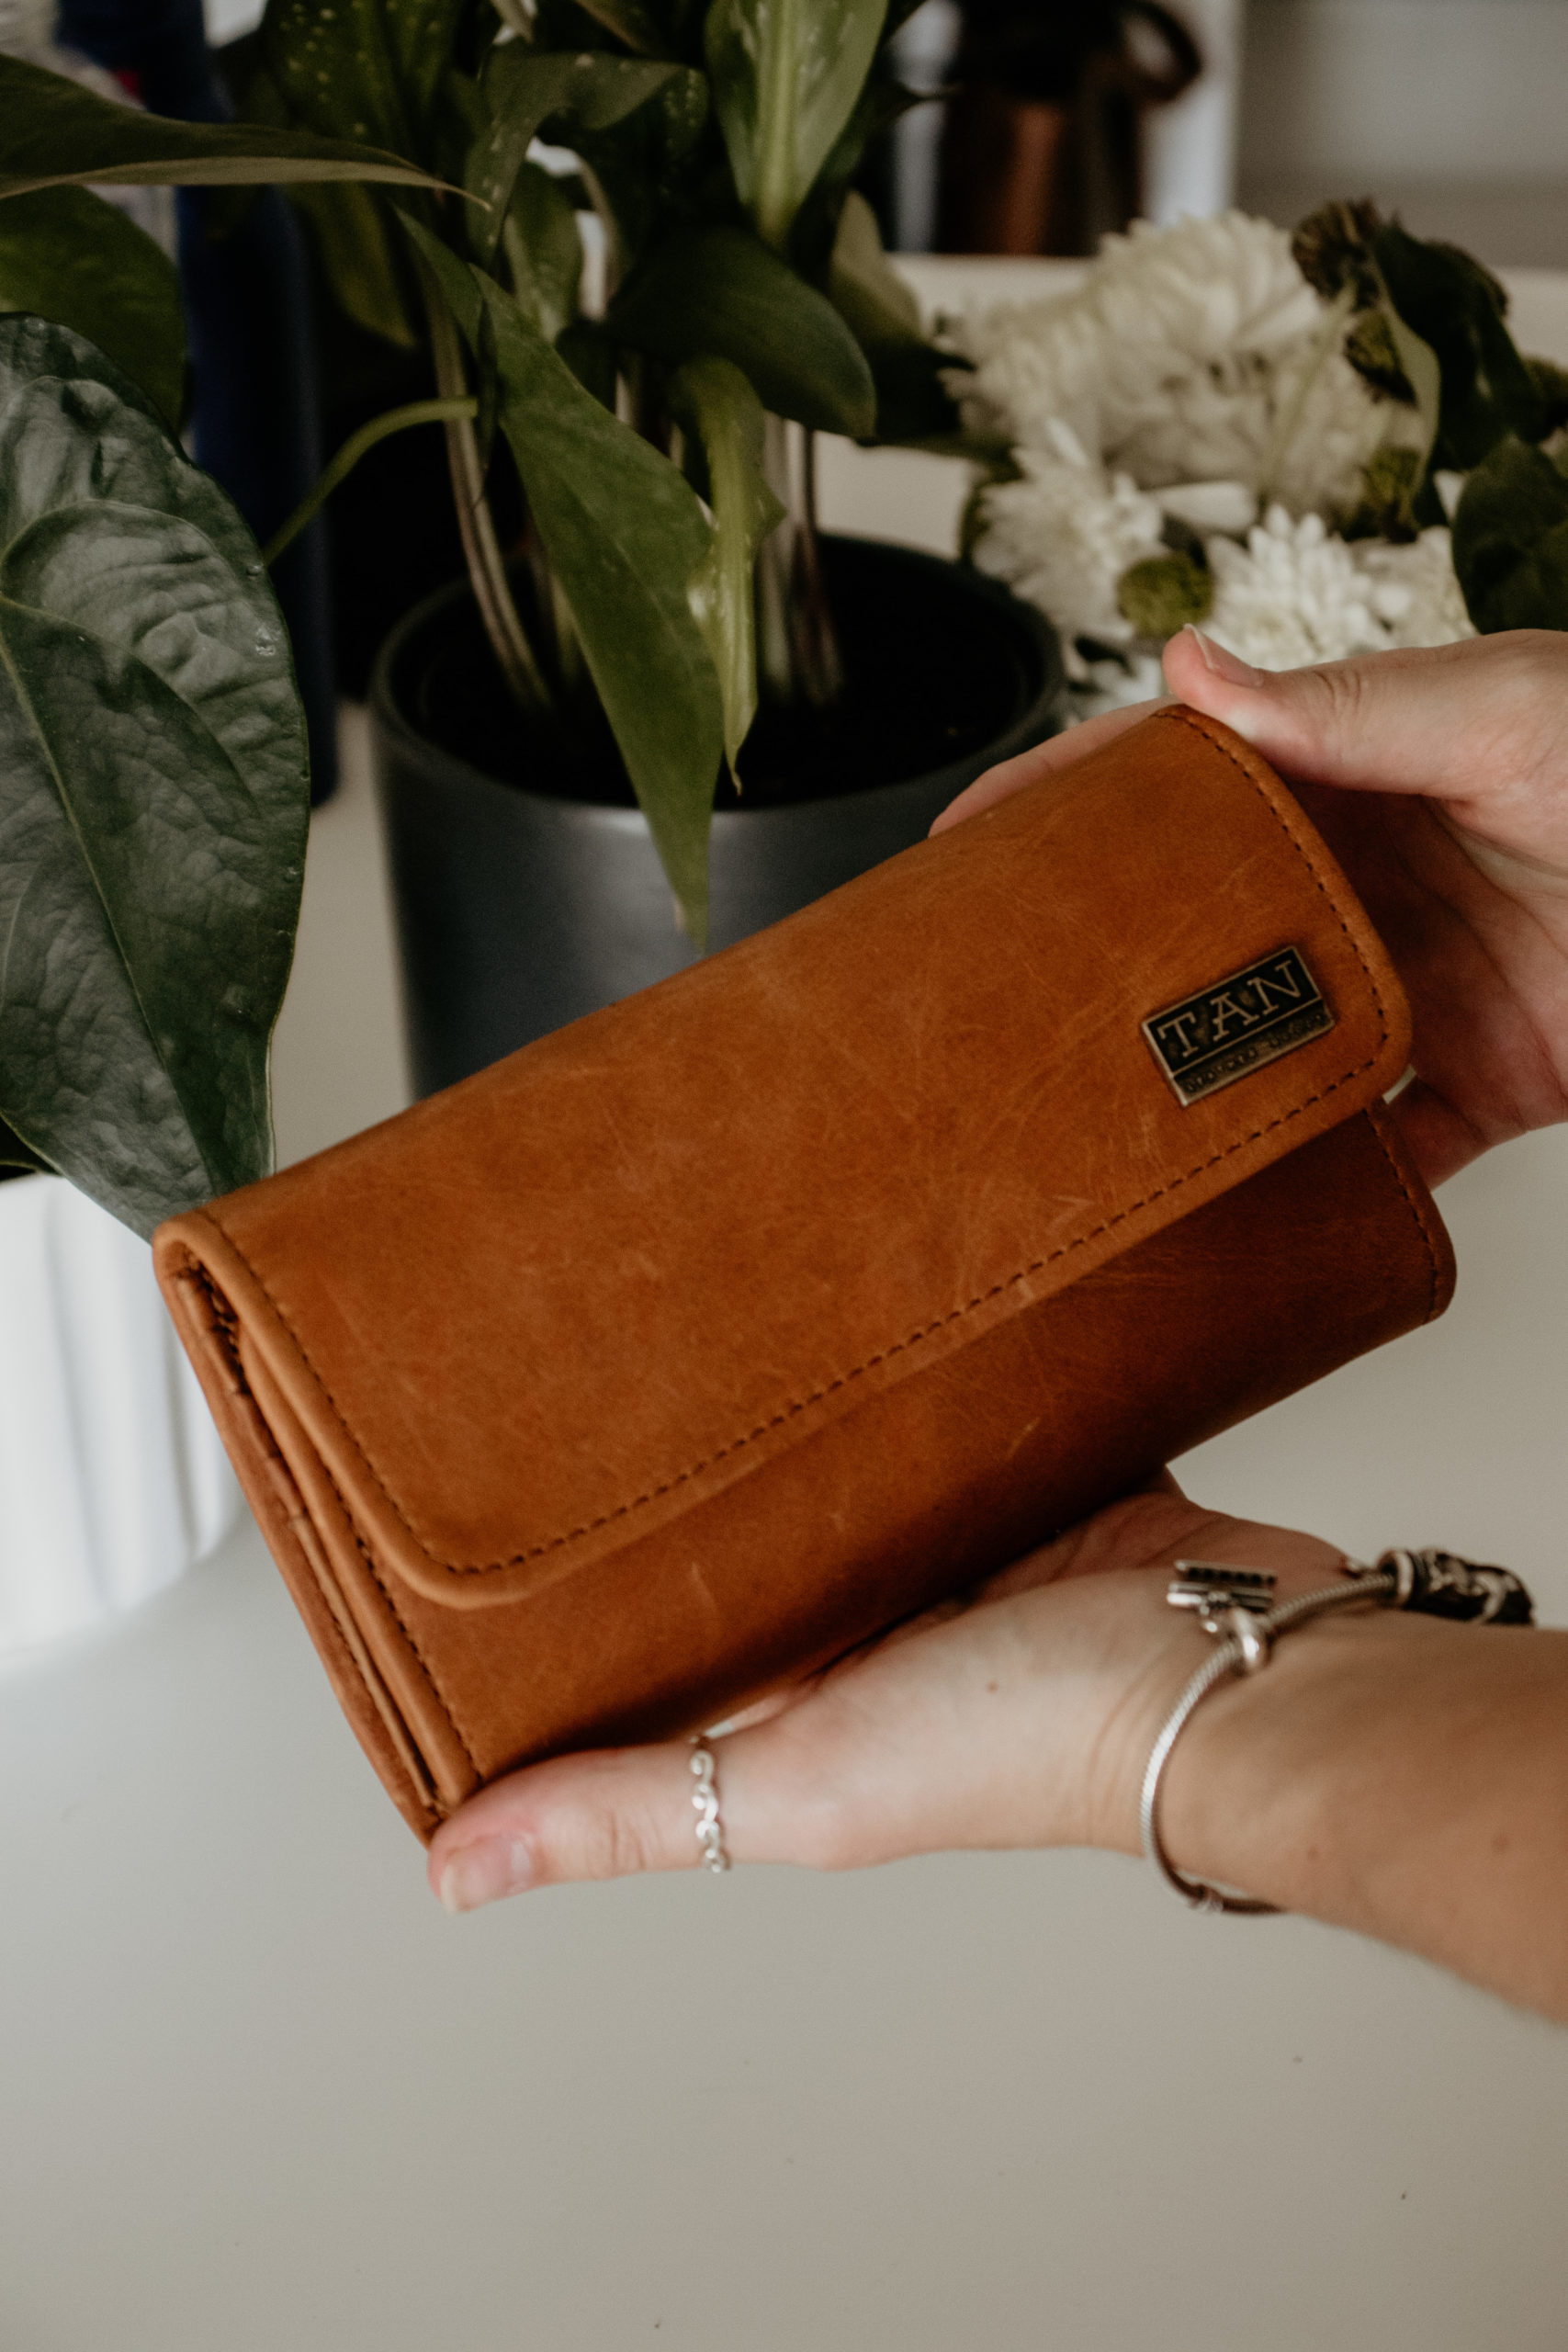 How to Start A Small Leather Bag Making Business 2023 ? - StartupYo